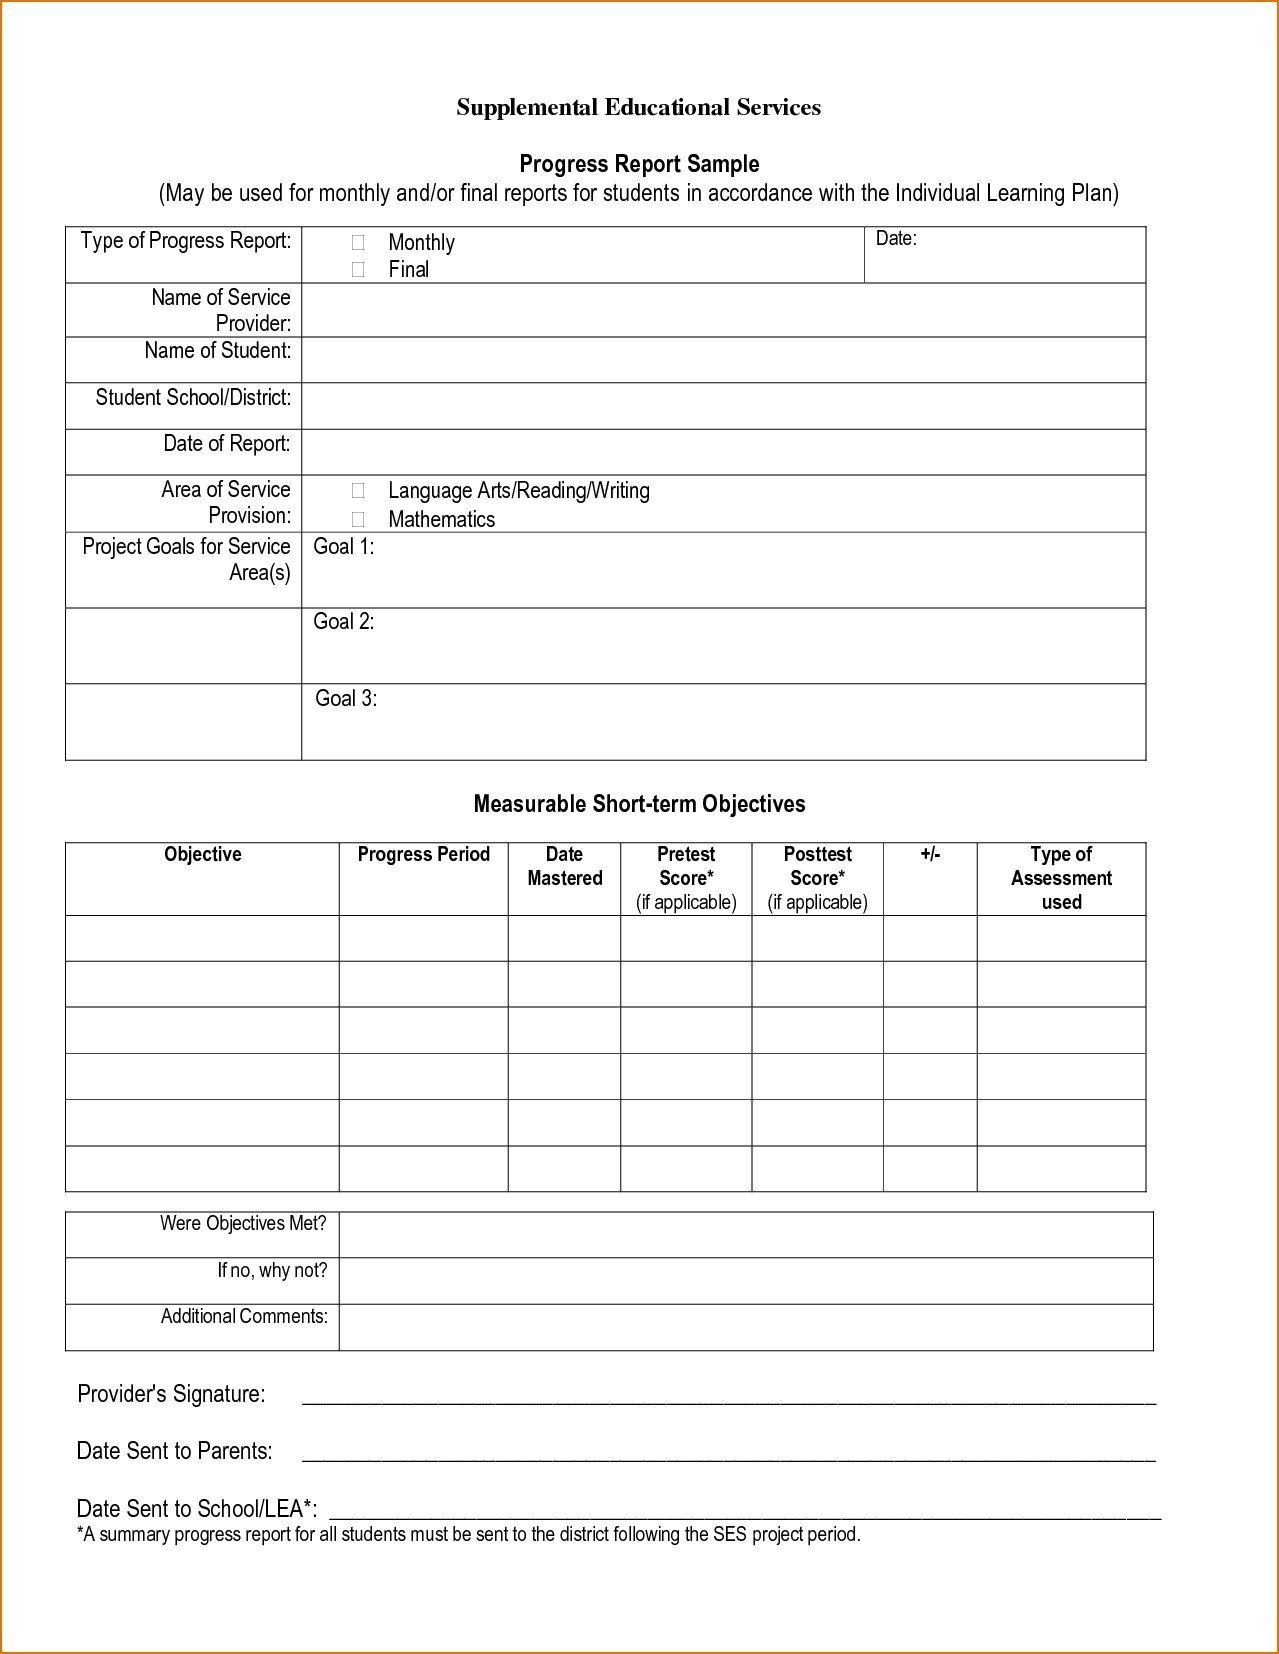 Homeschool Report Cardplate New Middle School Cool Progress Of intended for Homeschool Middle School Report Card Template